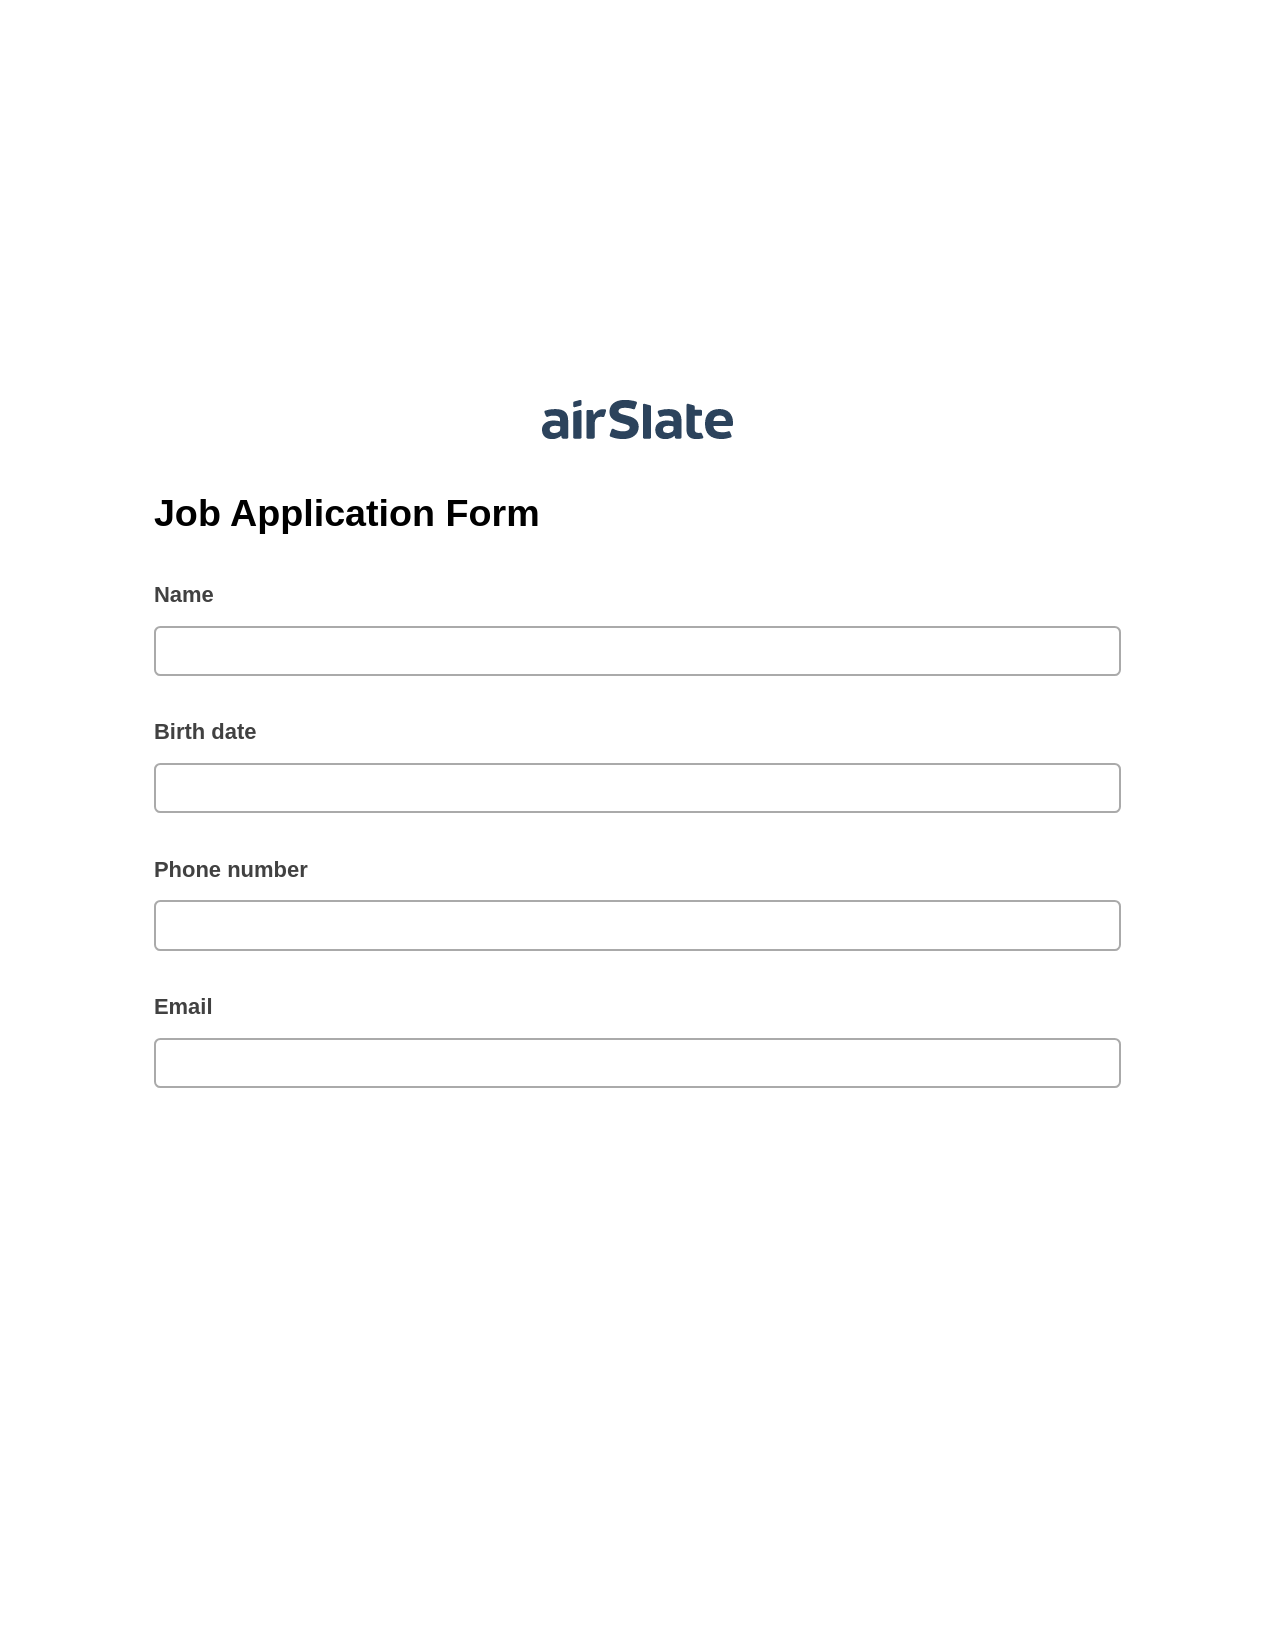 Job Application Form Pre-fill from CSV File Dropdown Options Bot, Text Message Notification Bot, Export to Formstack Documents Bot